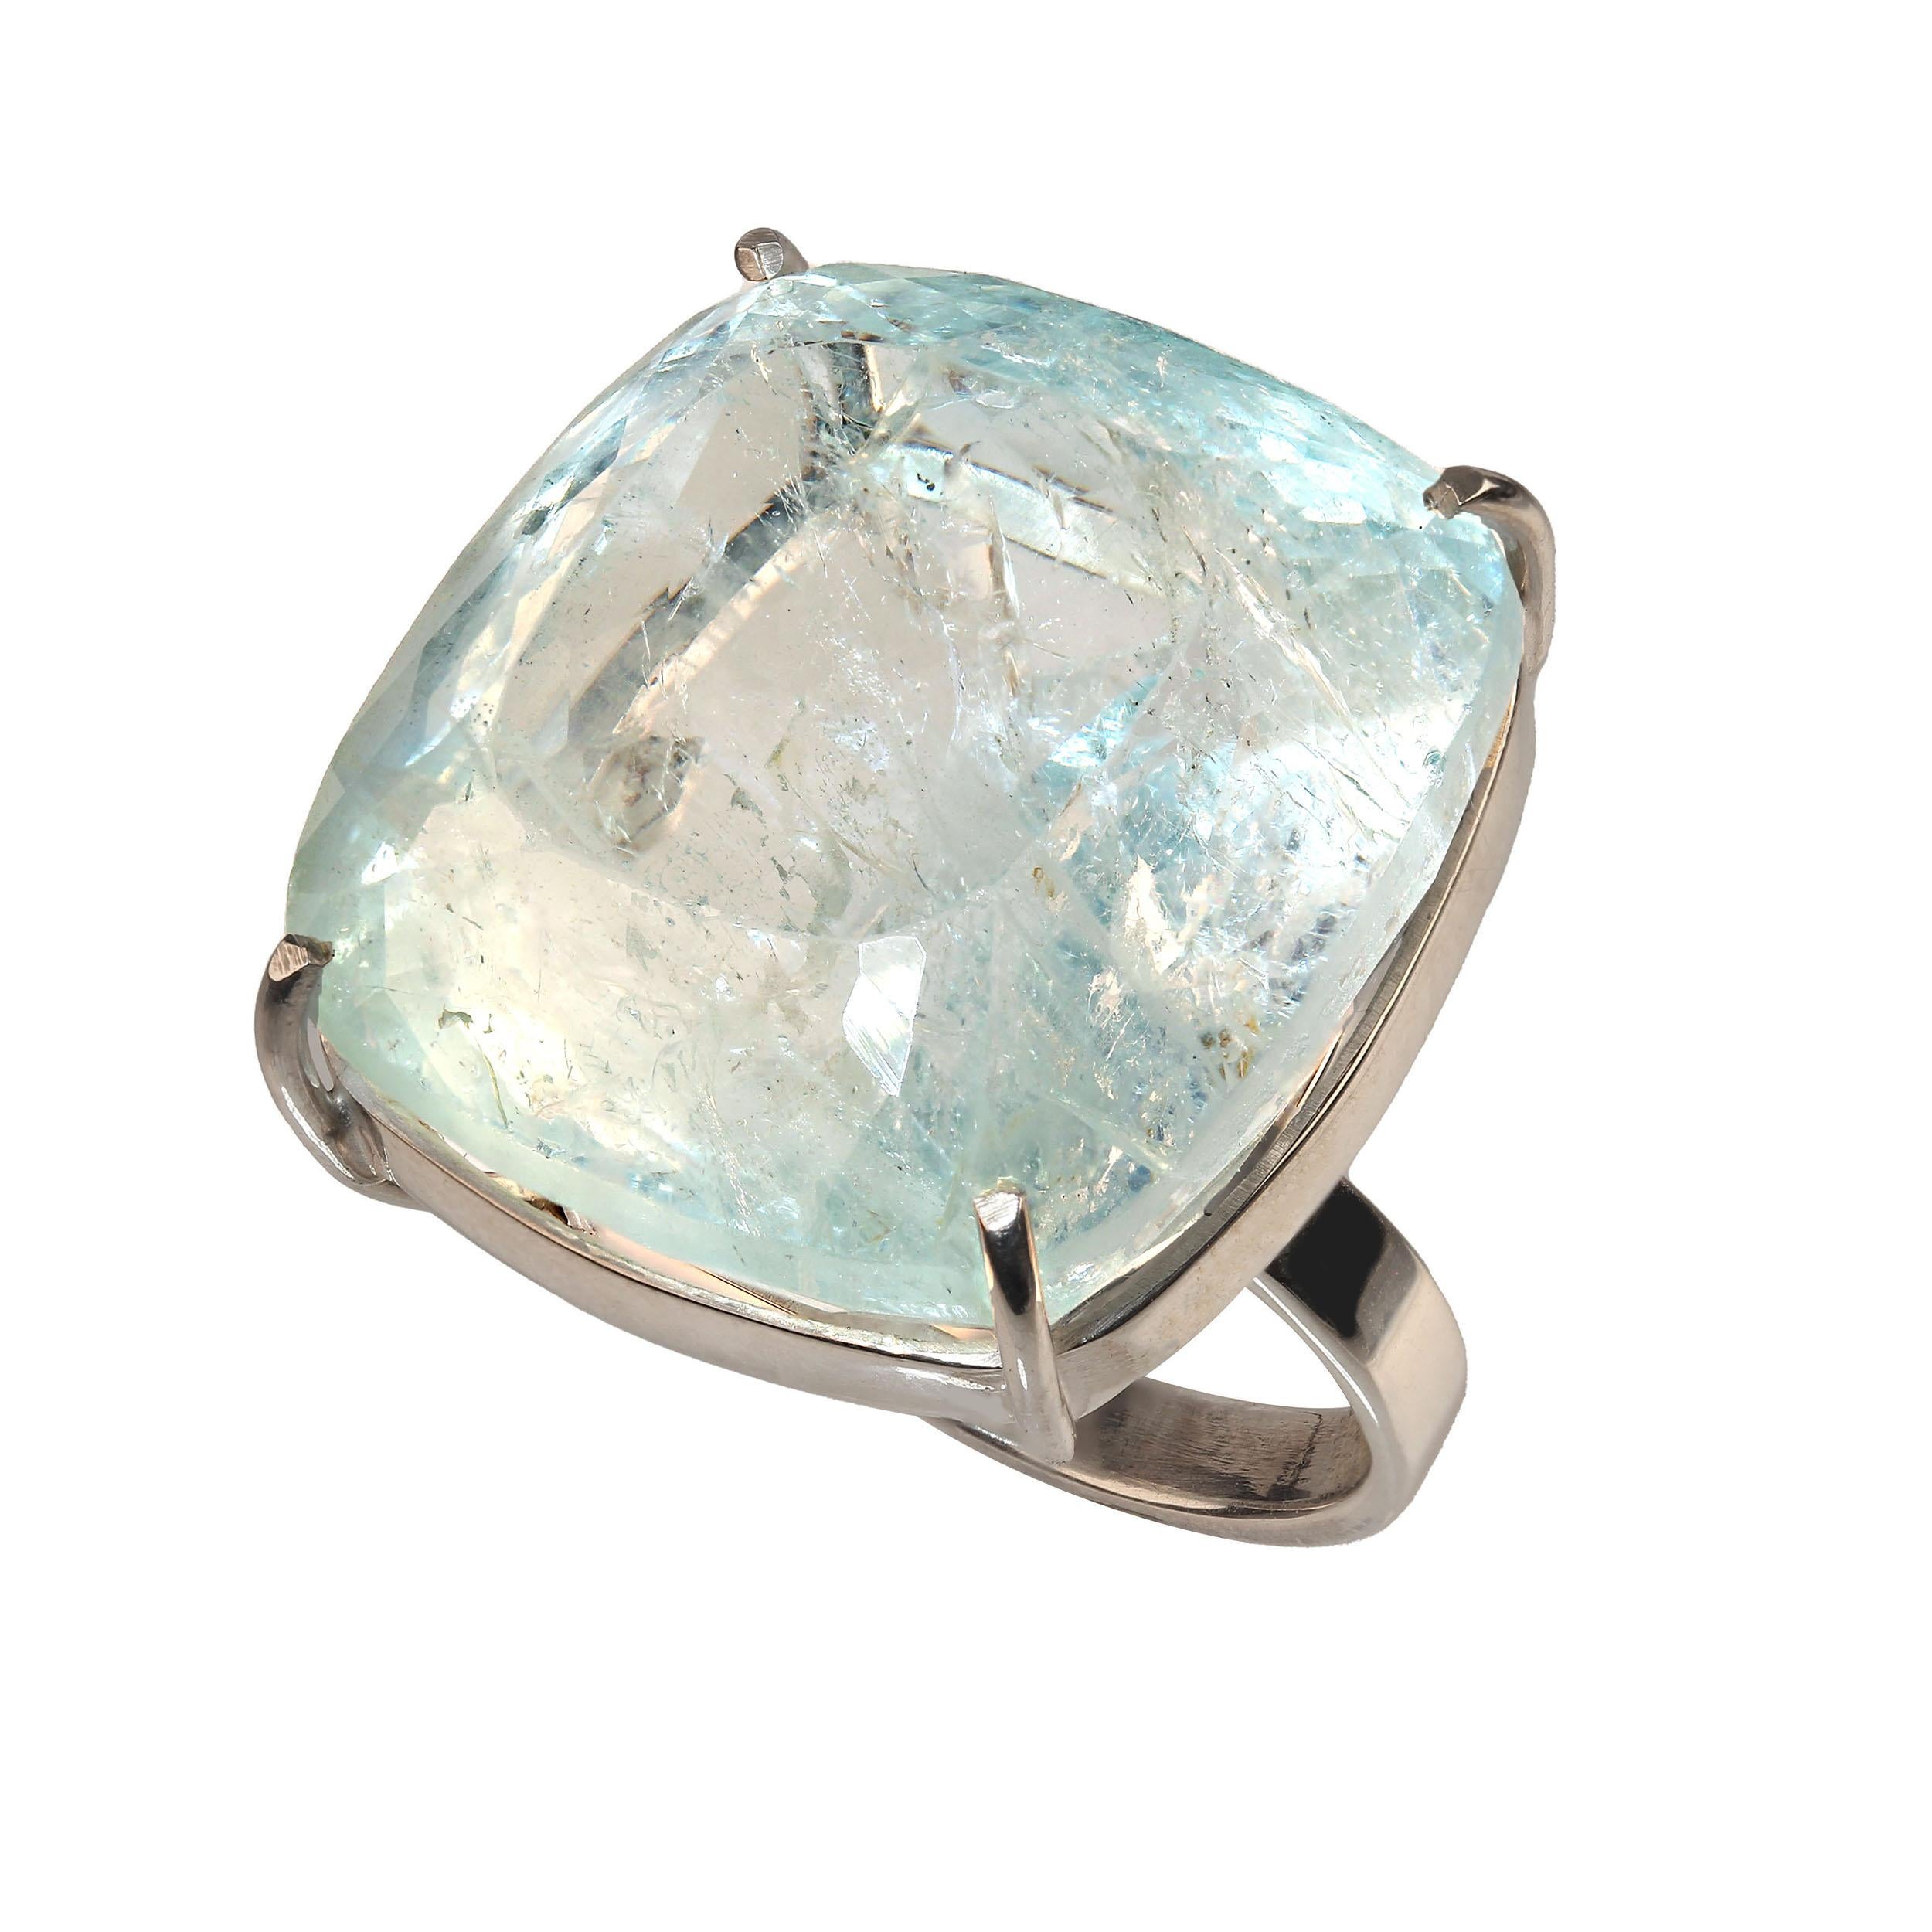  Great cushion cut, huge 50 carat Aquamarine ring!  This beauty is a real show stopper. Set in handmade setting of Sterling Silver this generous gemstone has all the natural inclusions associated with beryls which only make it more appealing. They